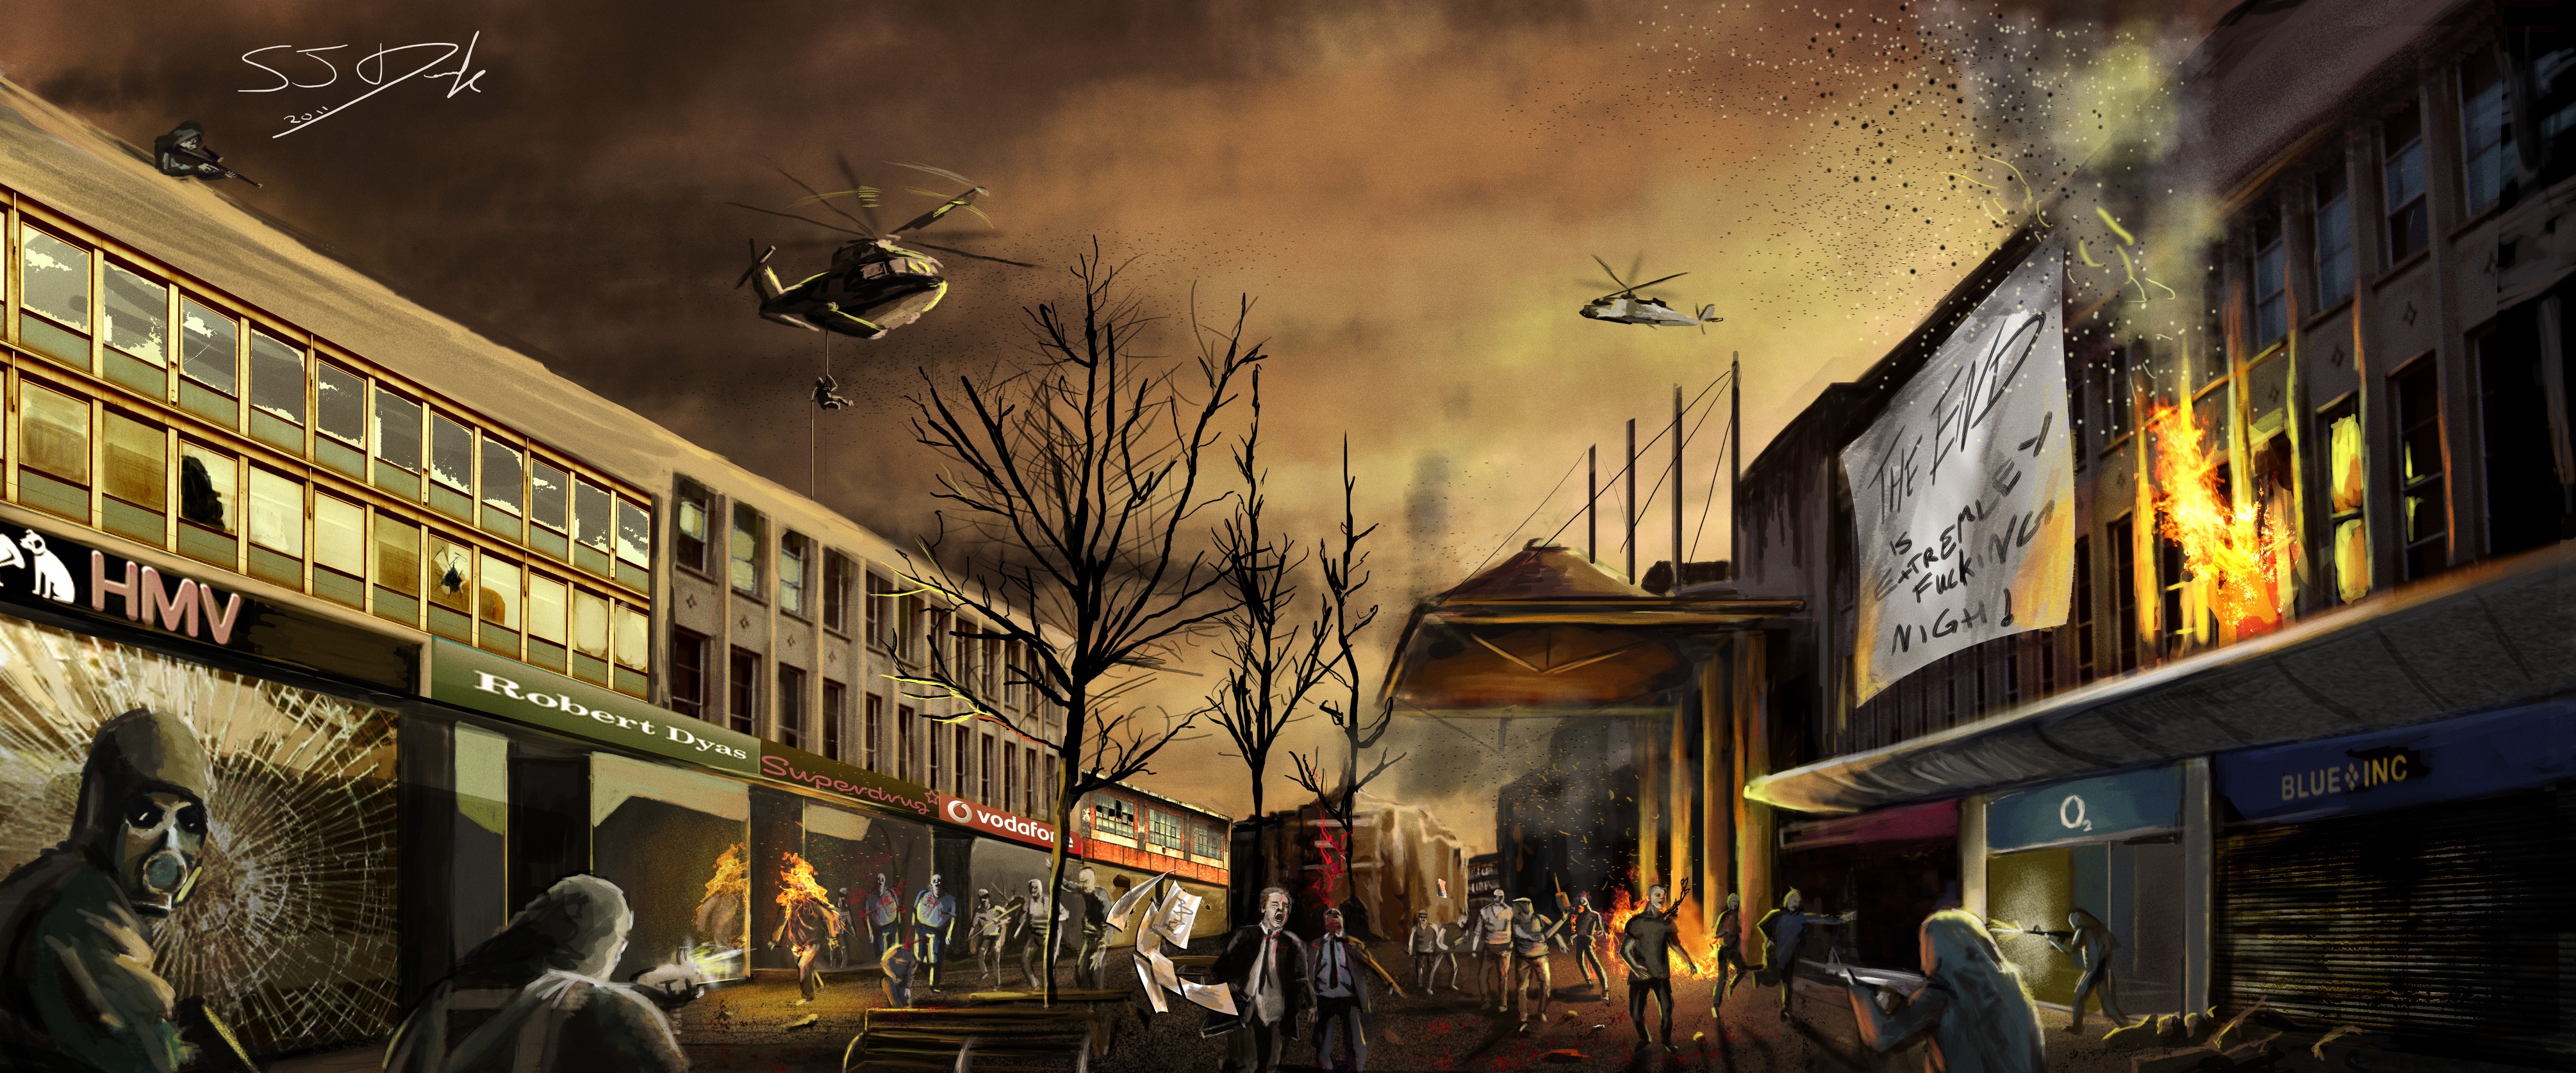 General 4020x1675 zombies apocalyptic undead futuristic artwork